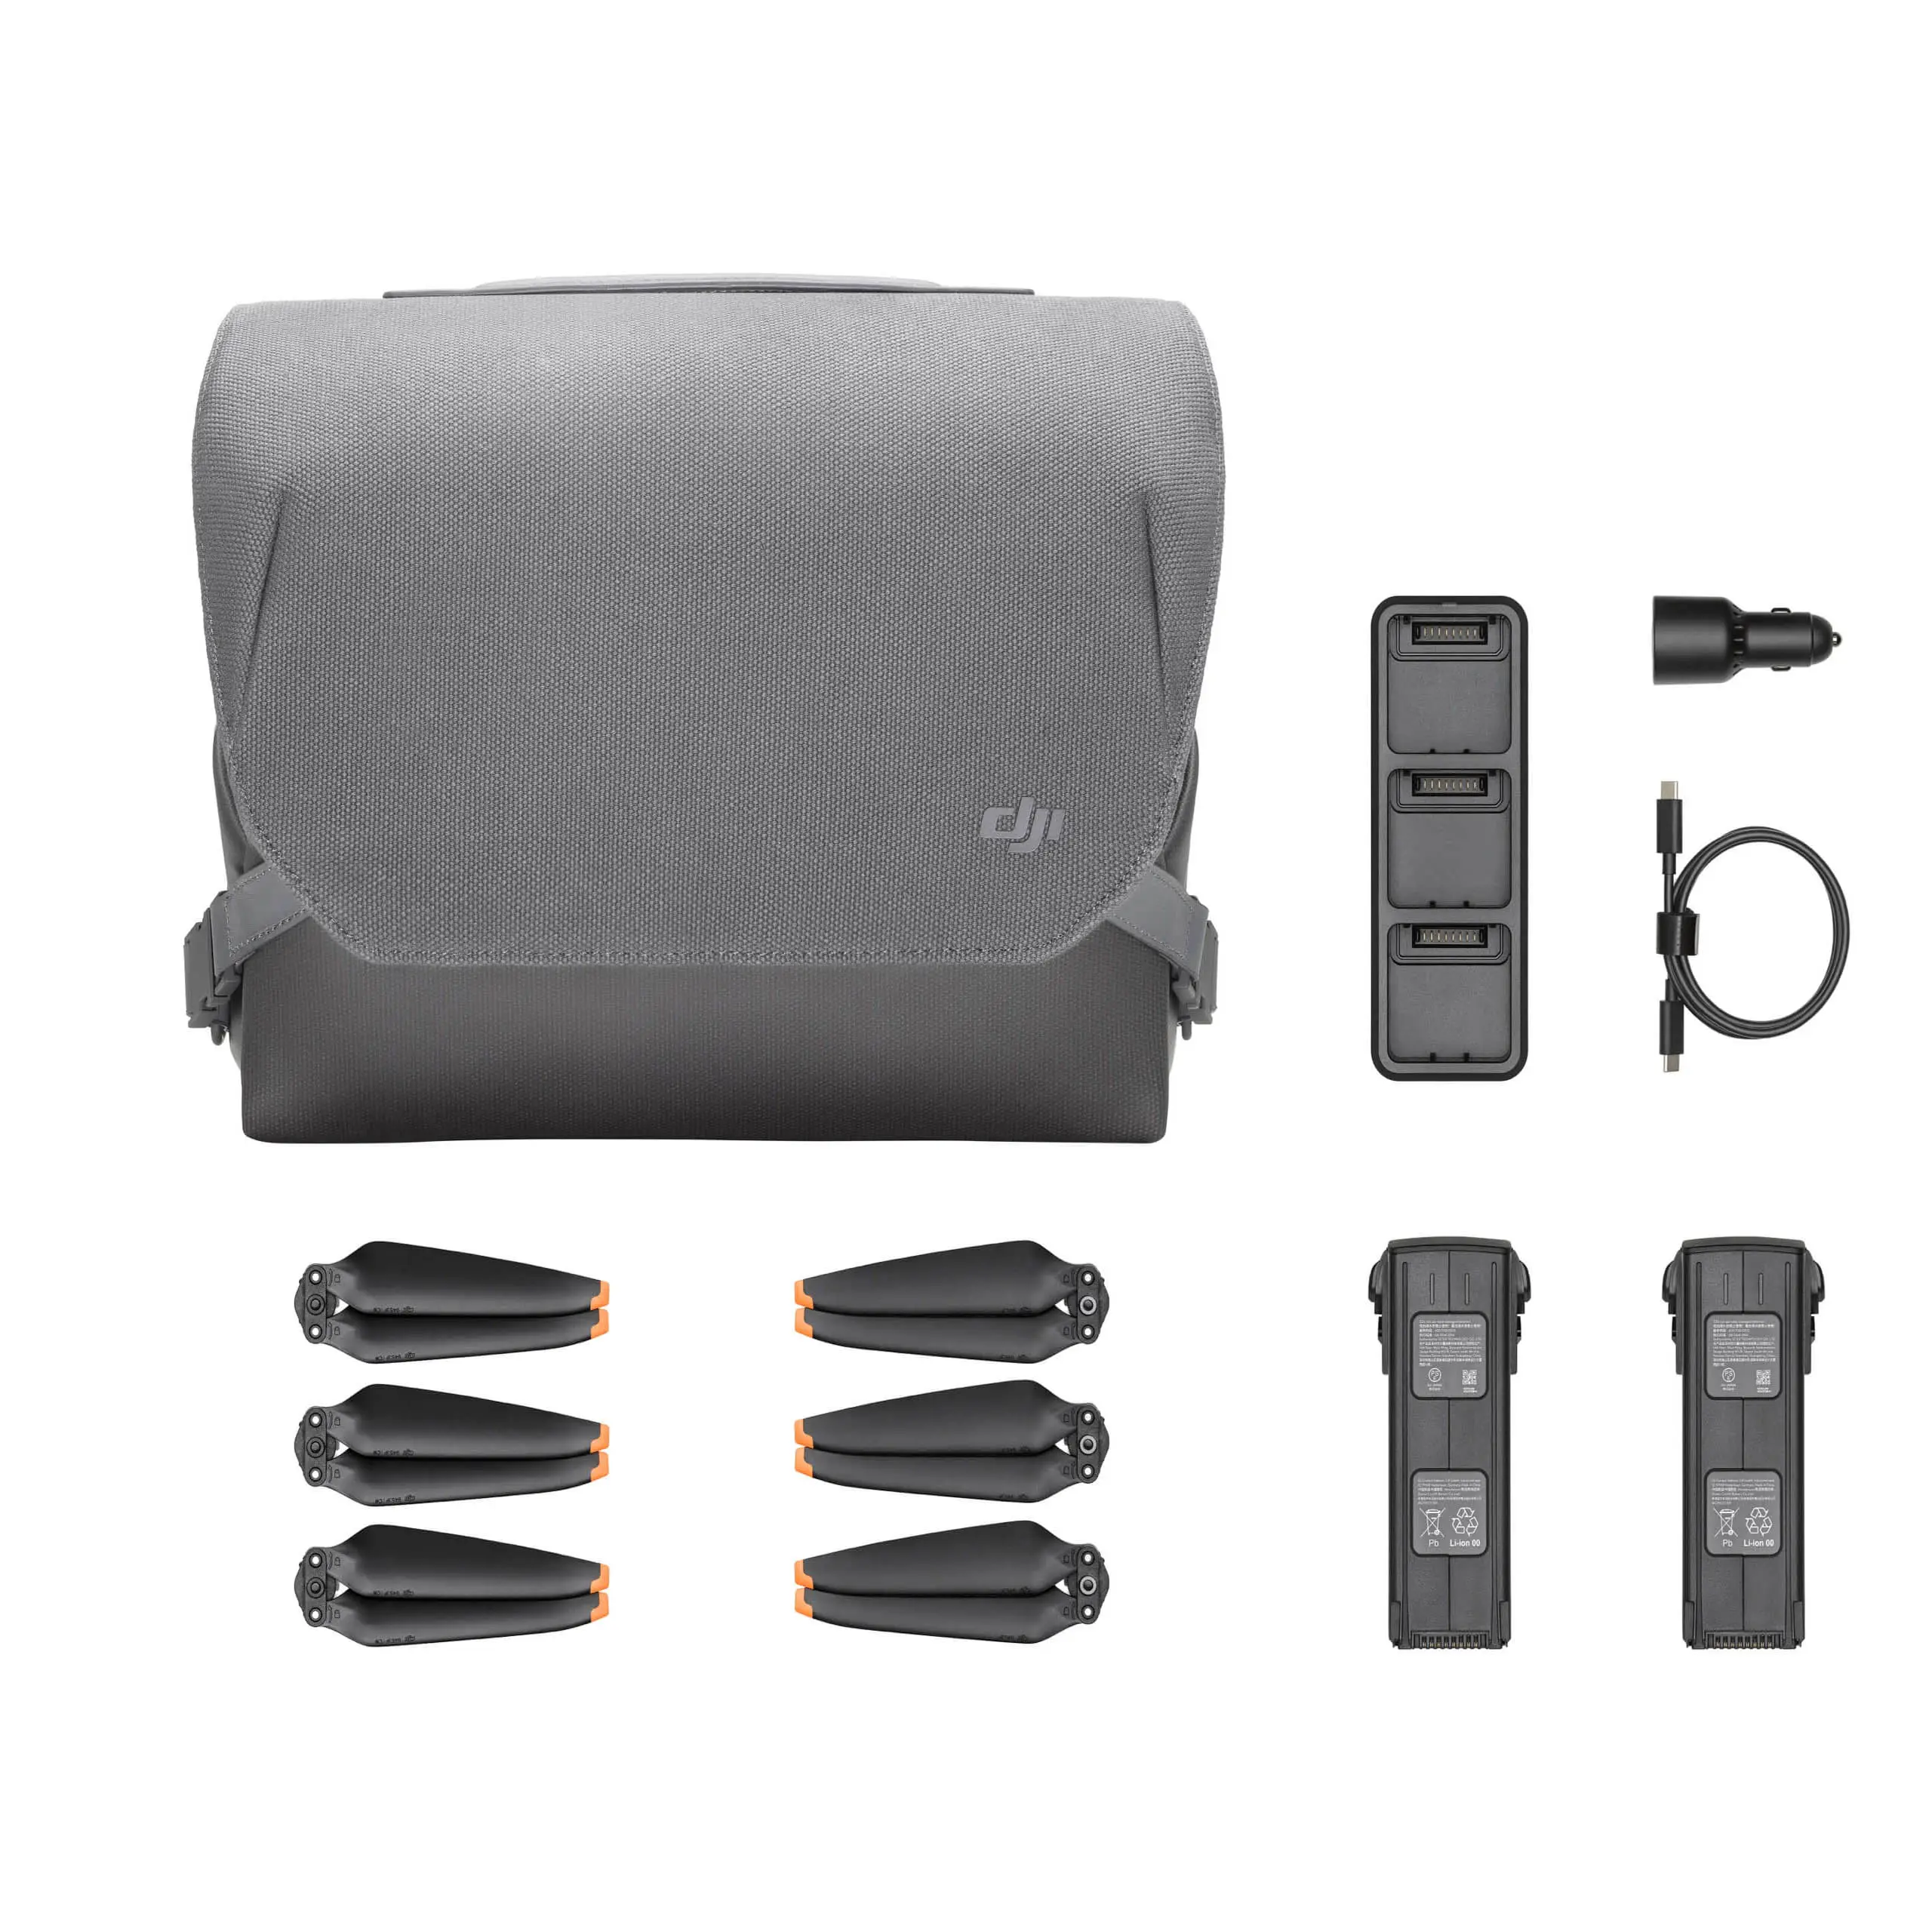 Sky Fly Original Mavic 3 Classic flymore fly more combo kit plus spare Parts for DJI Drone Accessories propellers battery bag